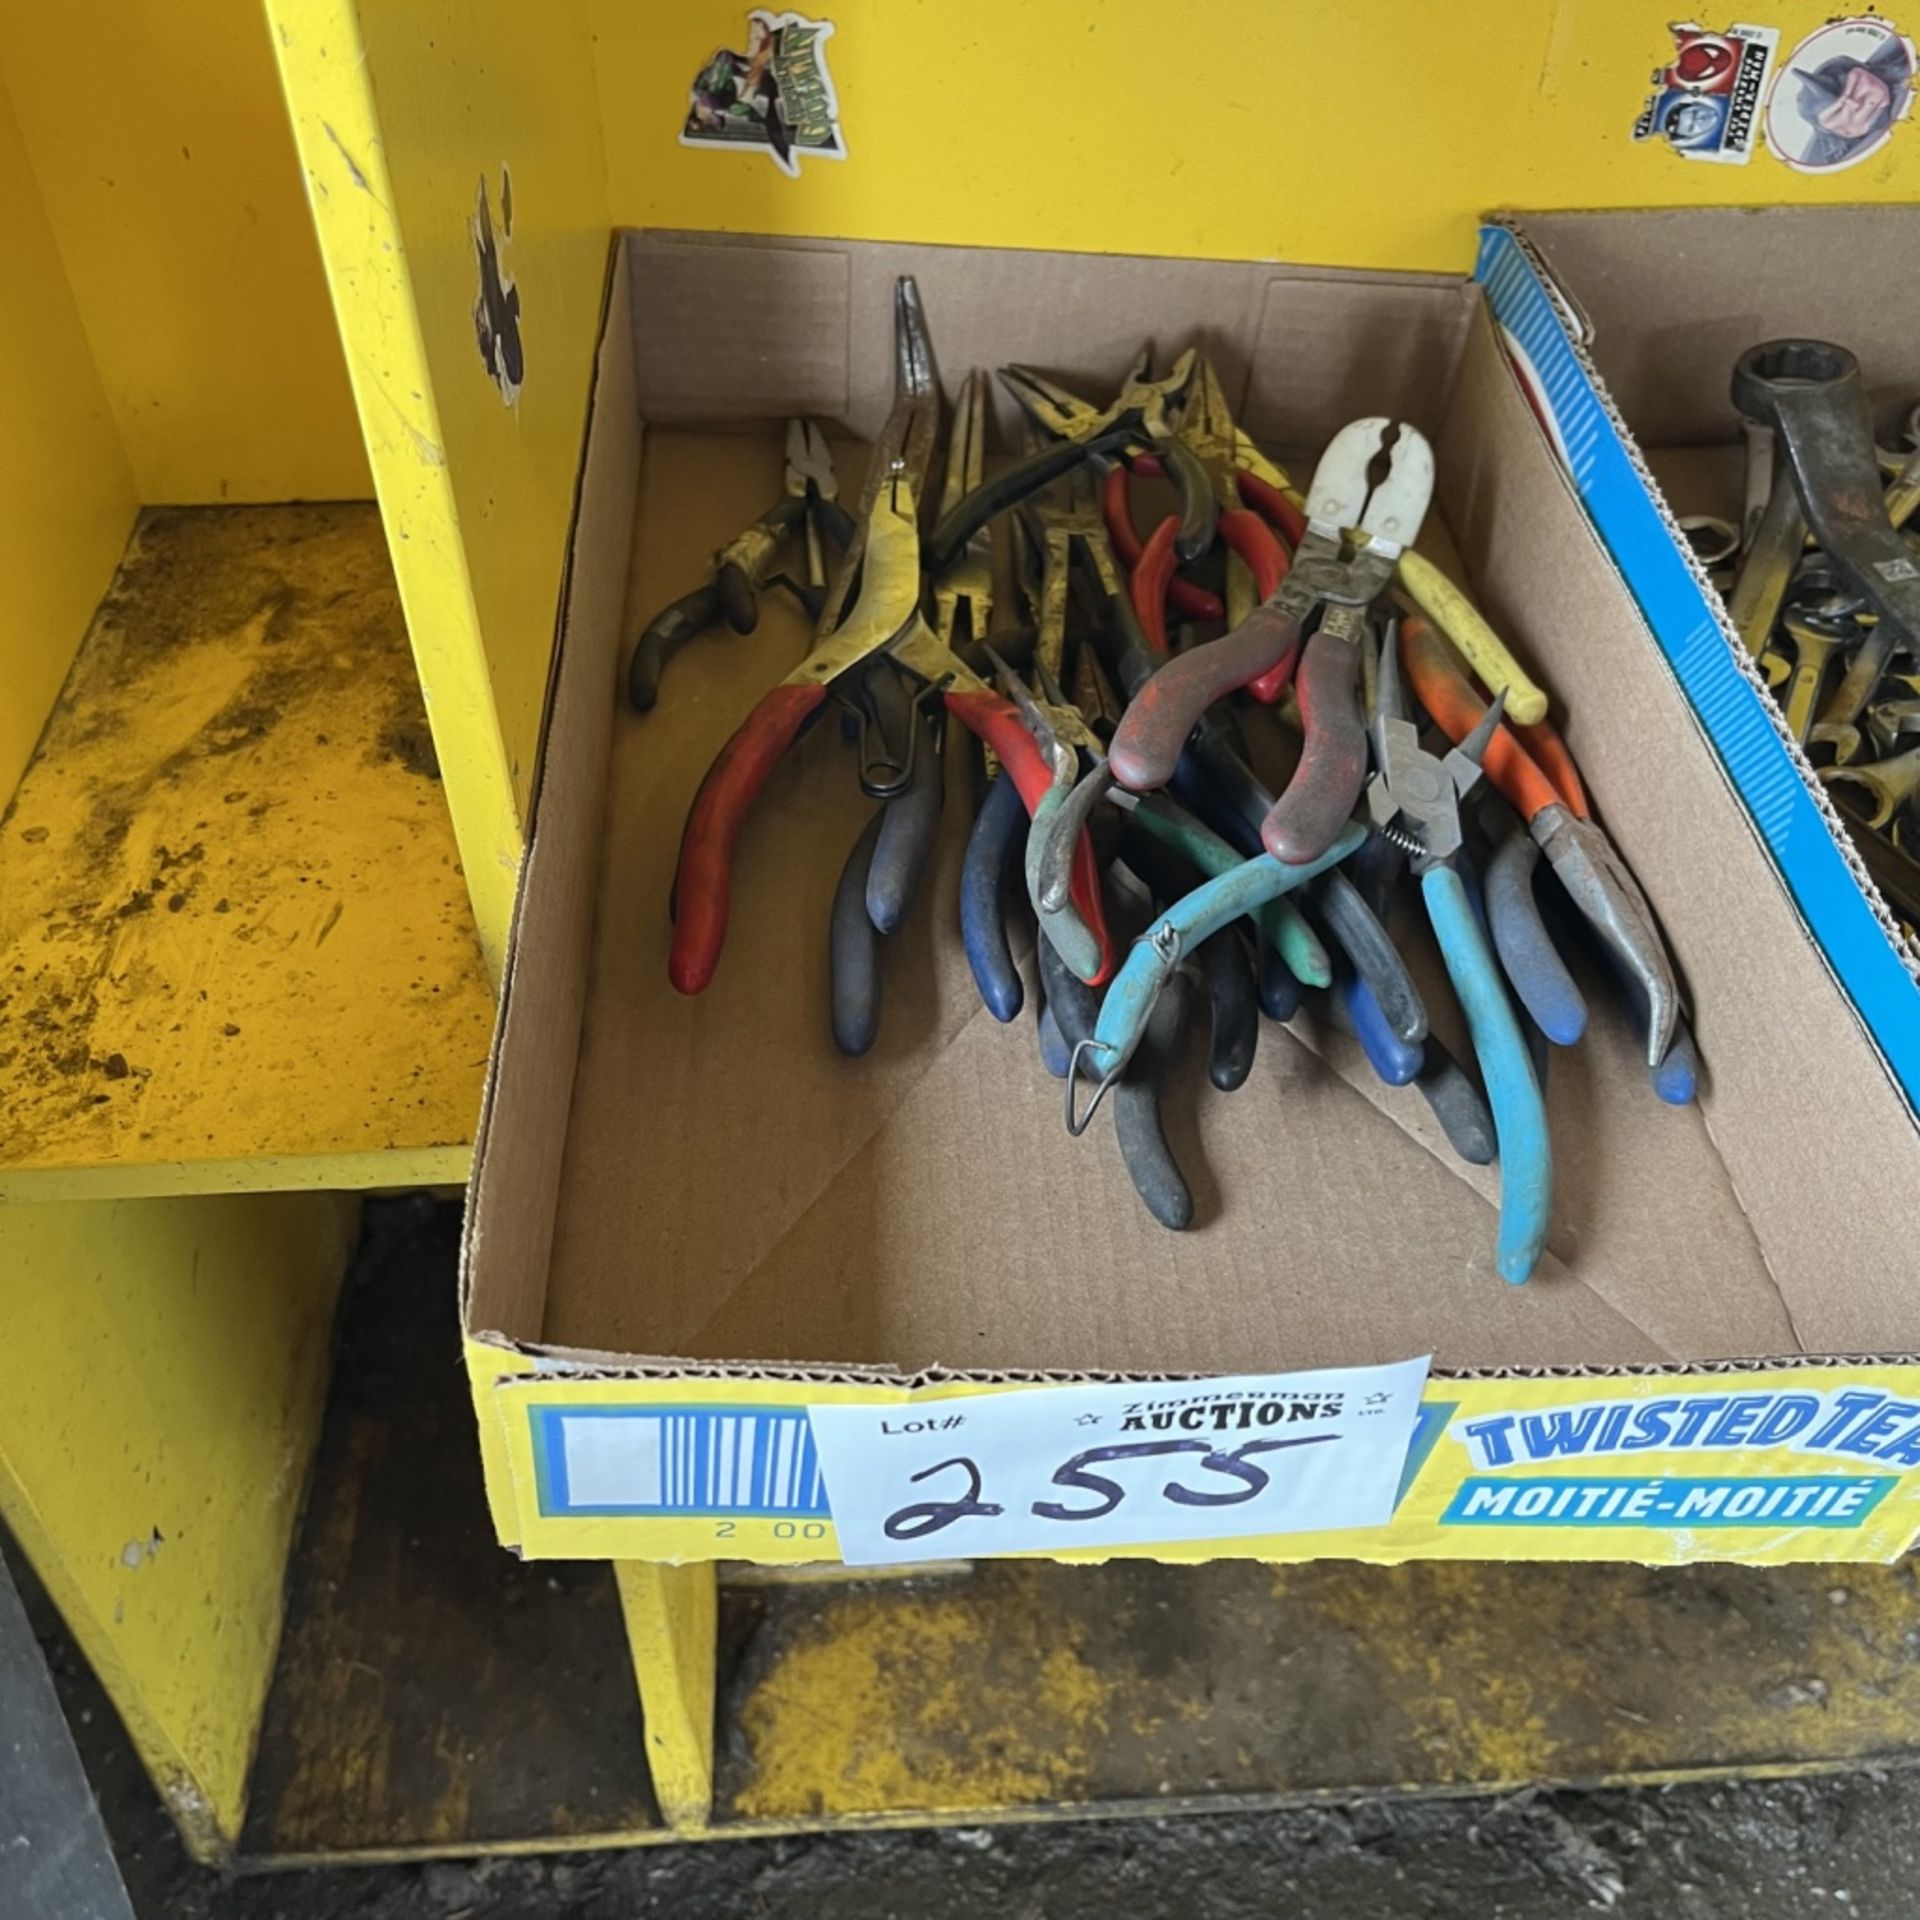 Misc. Tools, Pliers